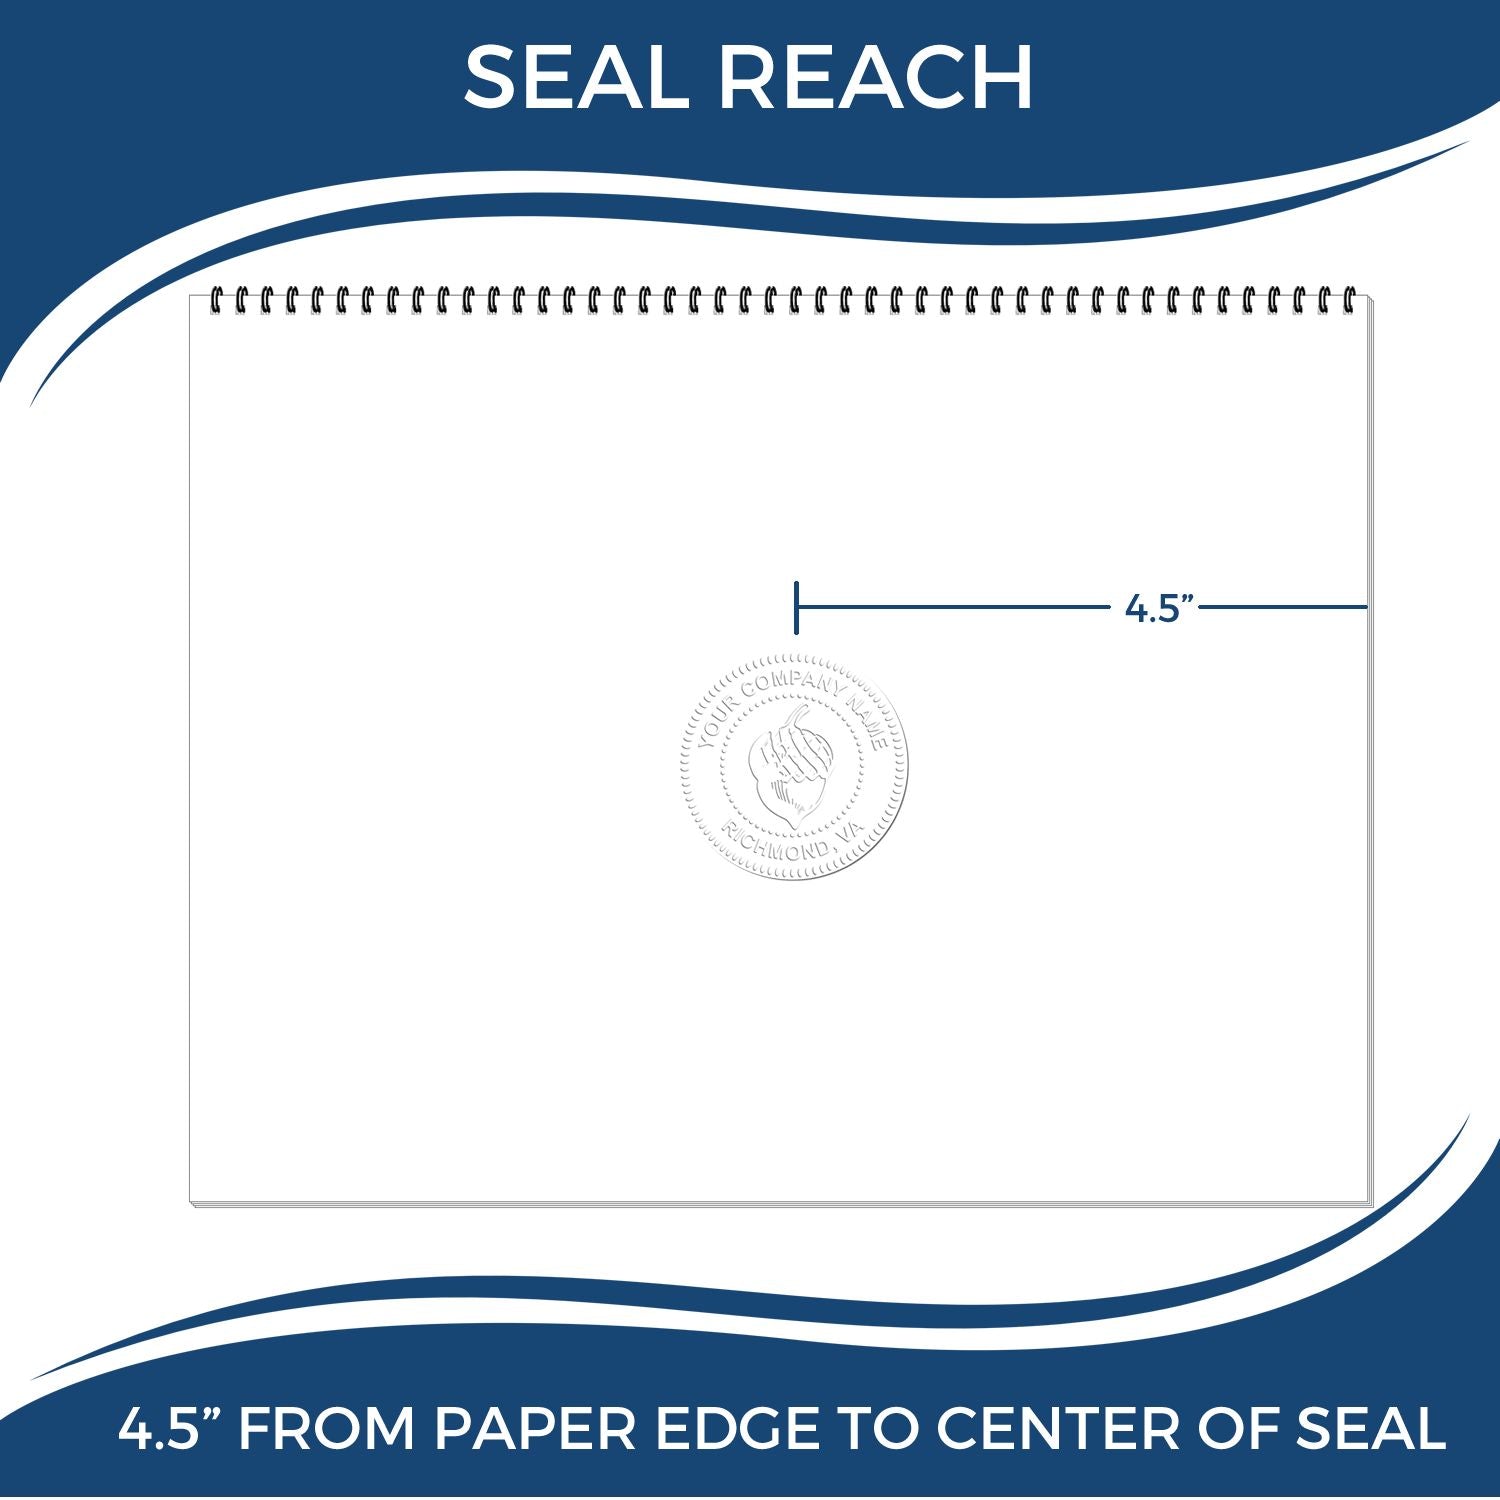 An infographic showing the seal reach which is represented by a ruler and a miniature seal image of the State of Kansas Extended Long Reach Engineer Seal